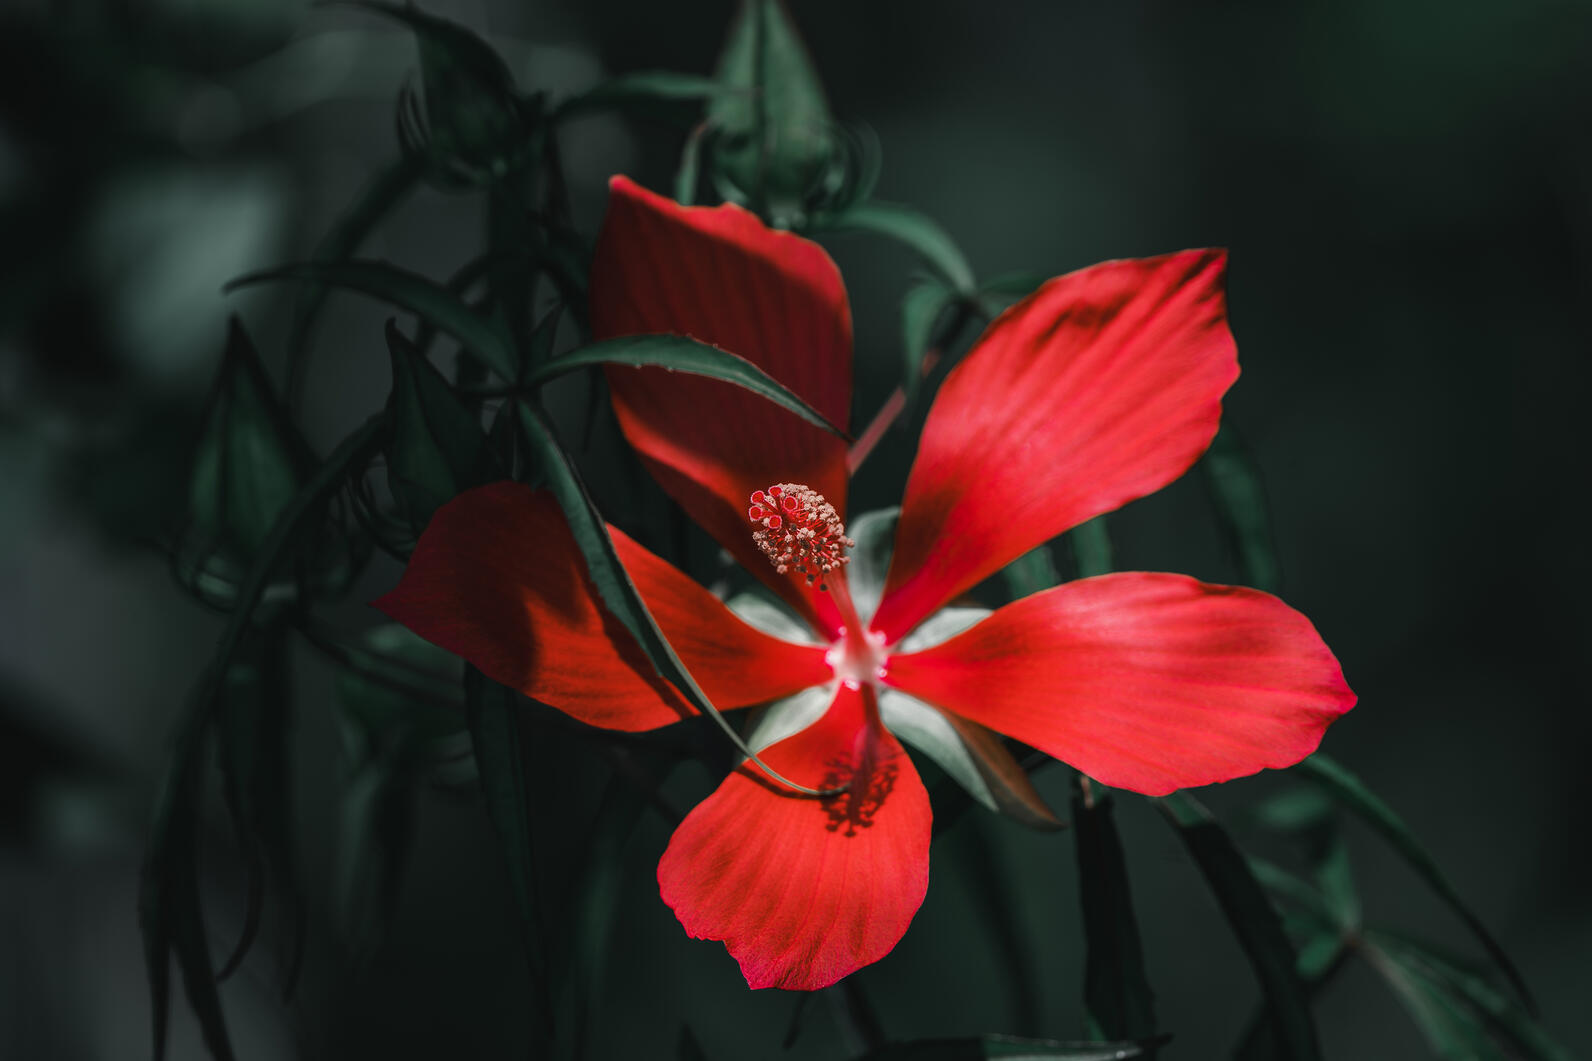 A red flower blooming